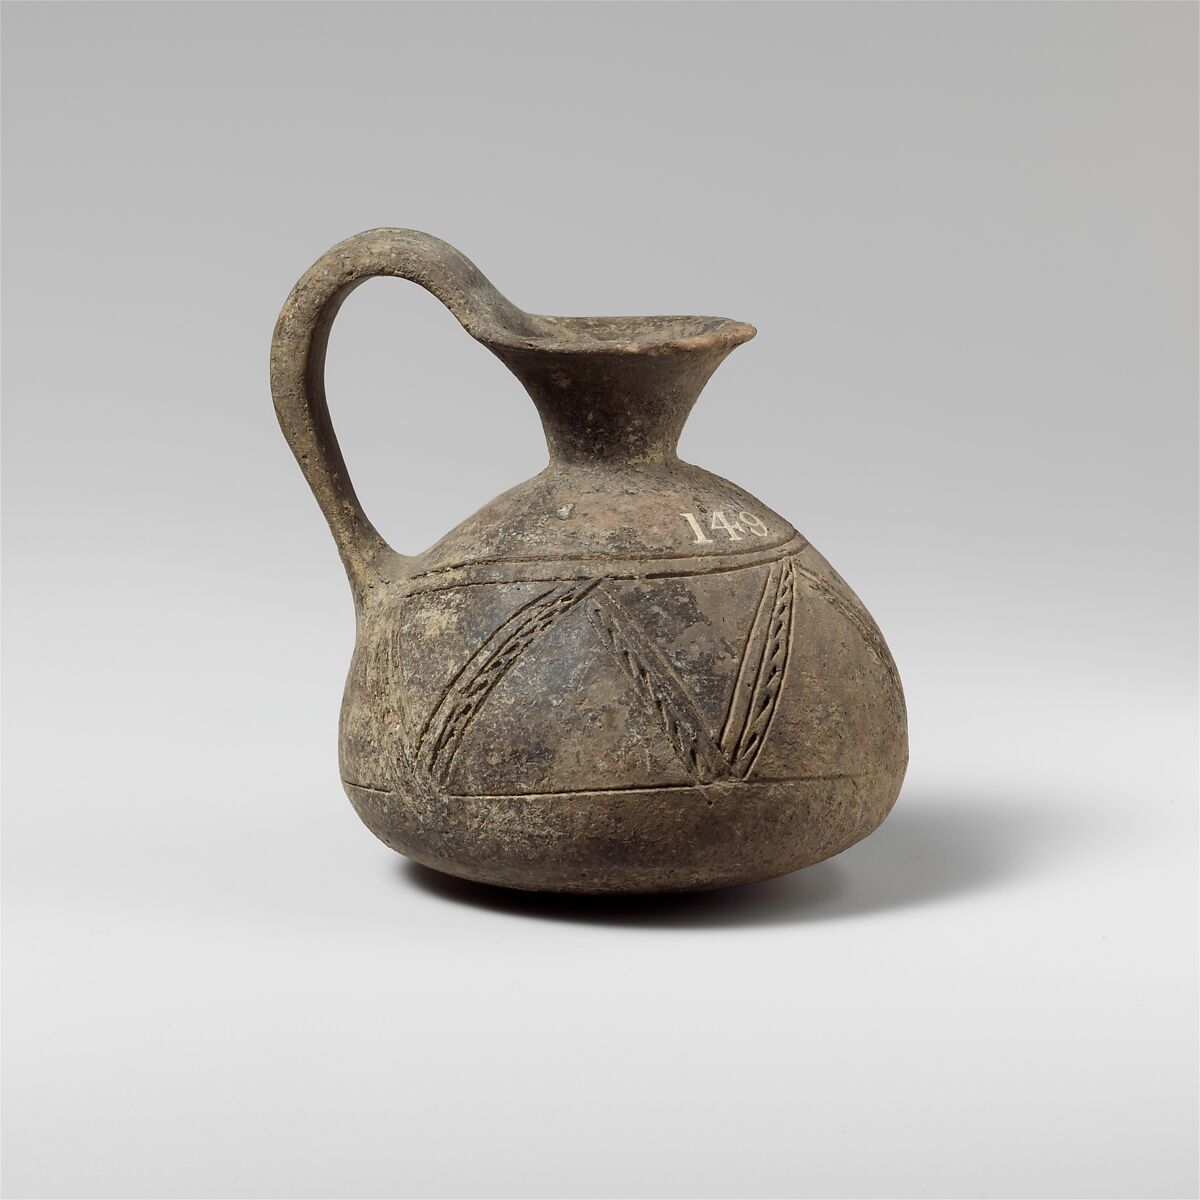 Terracotta jug with incised decoration, Terracotta, Cypriot 